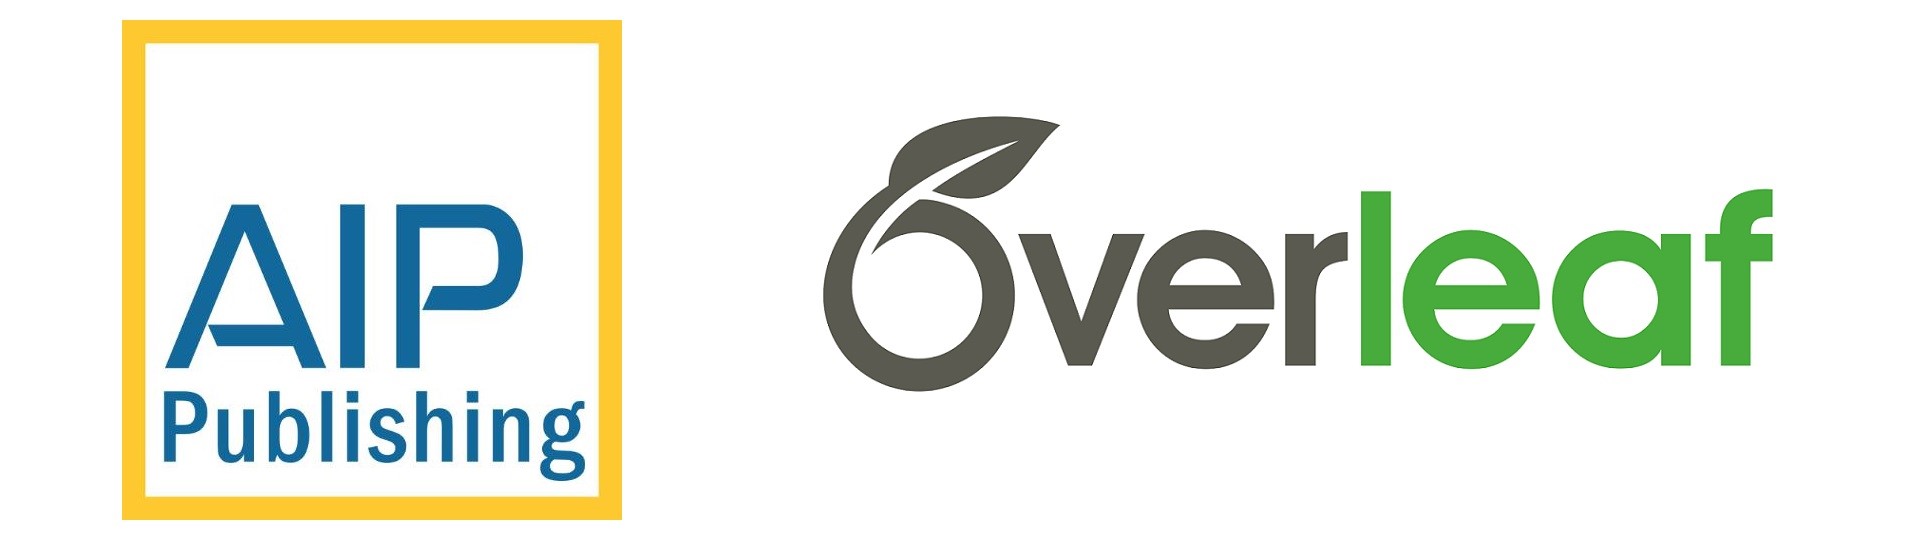 AIP Publishing and Overleaf logos